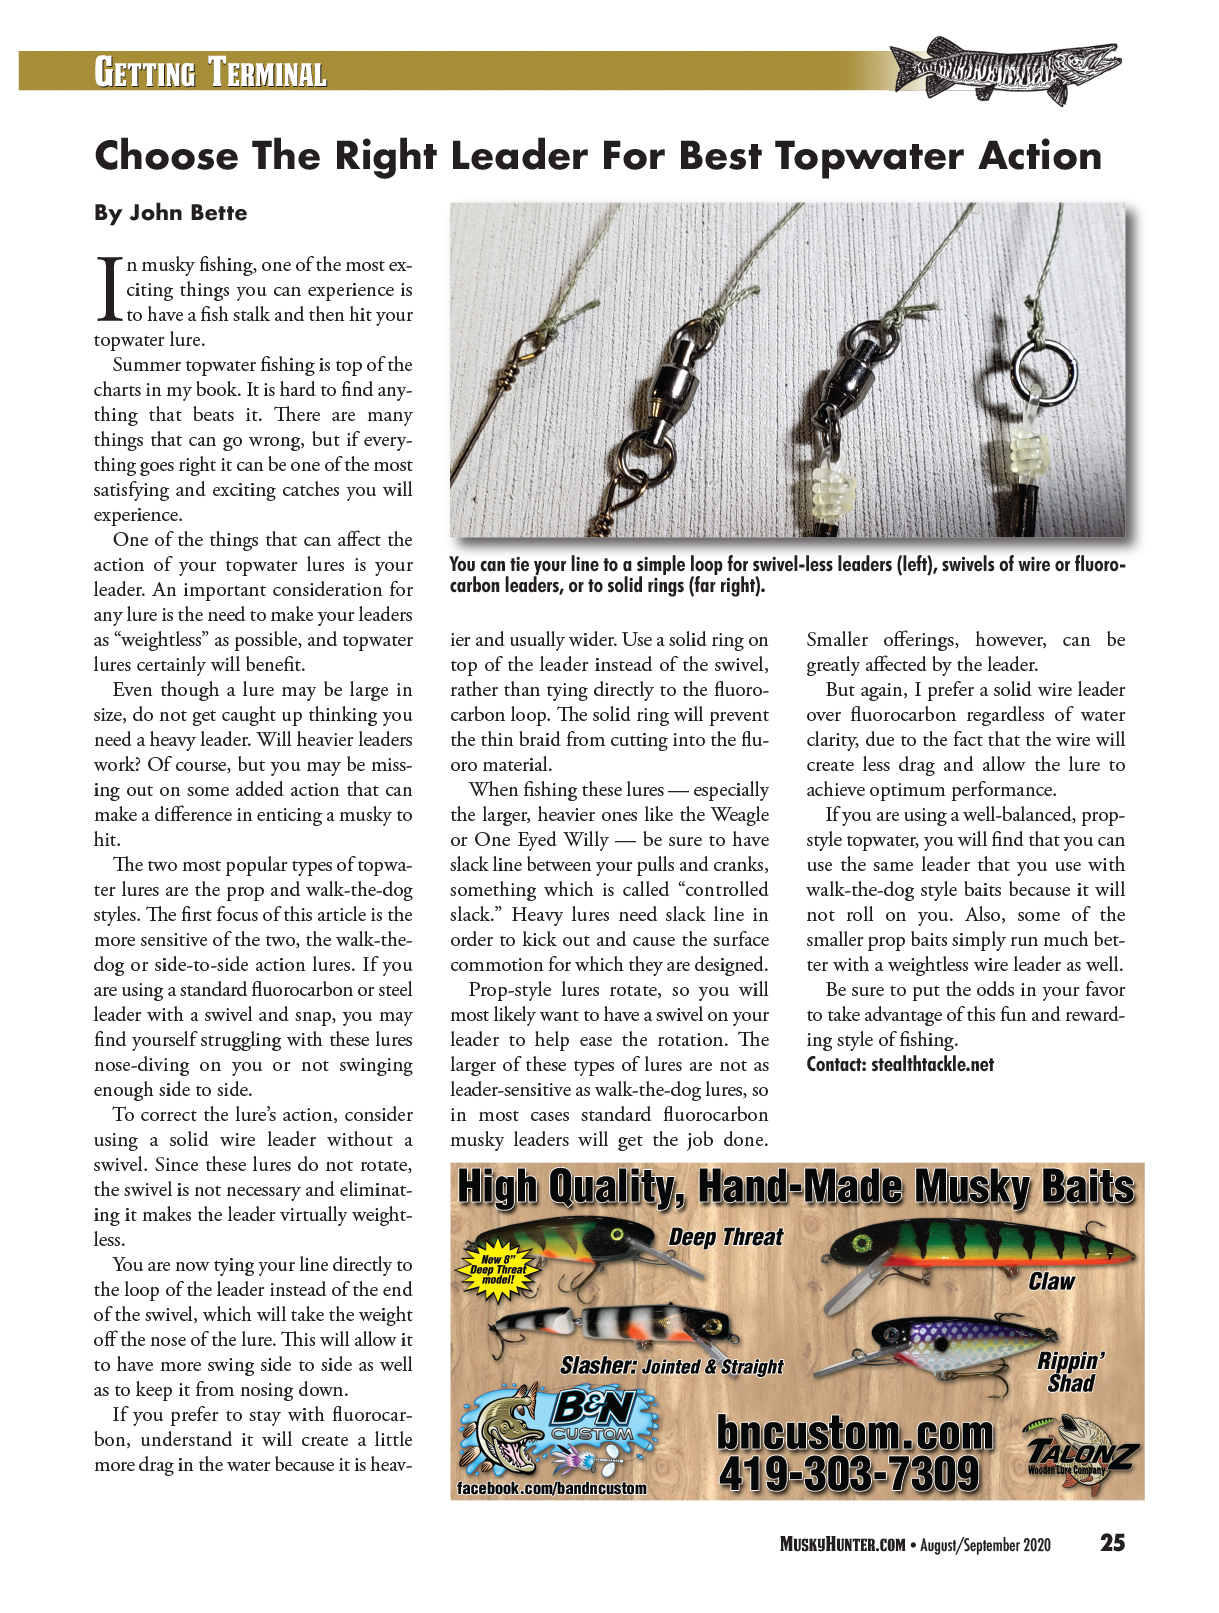 Choose The Right Leader For Best Topwater Action - Stealth Tackle